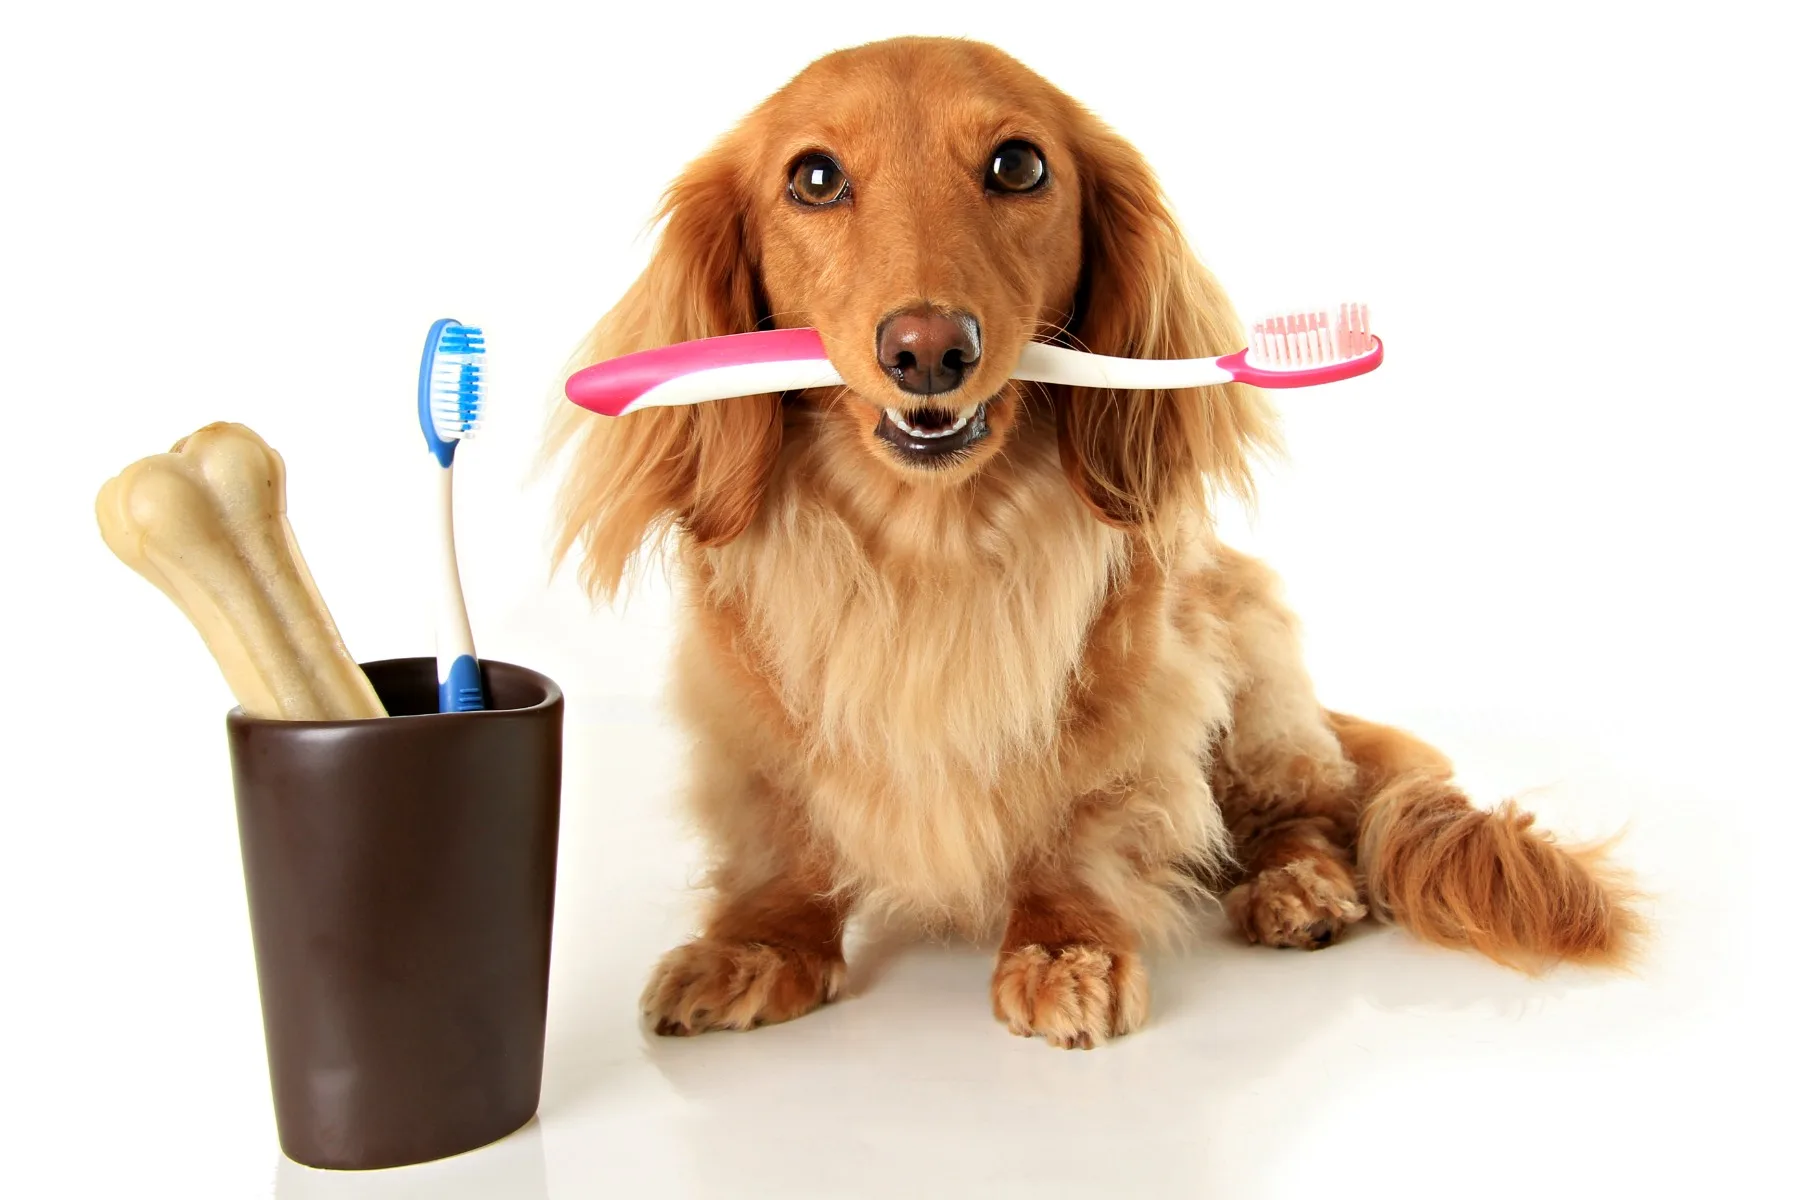 Each of the long lasting dog chews listed above effectively serves as a toothbrush for your dog!